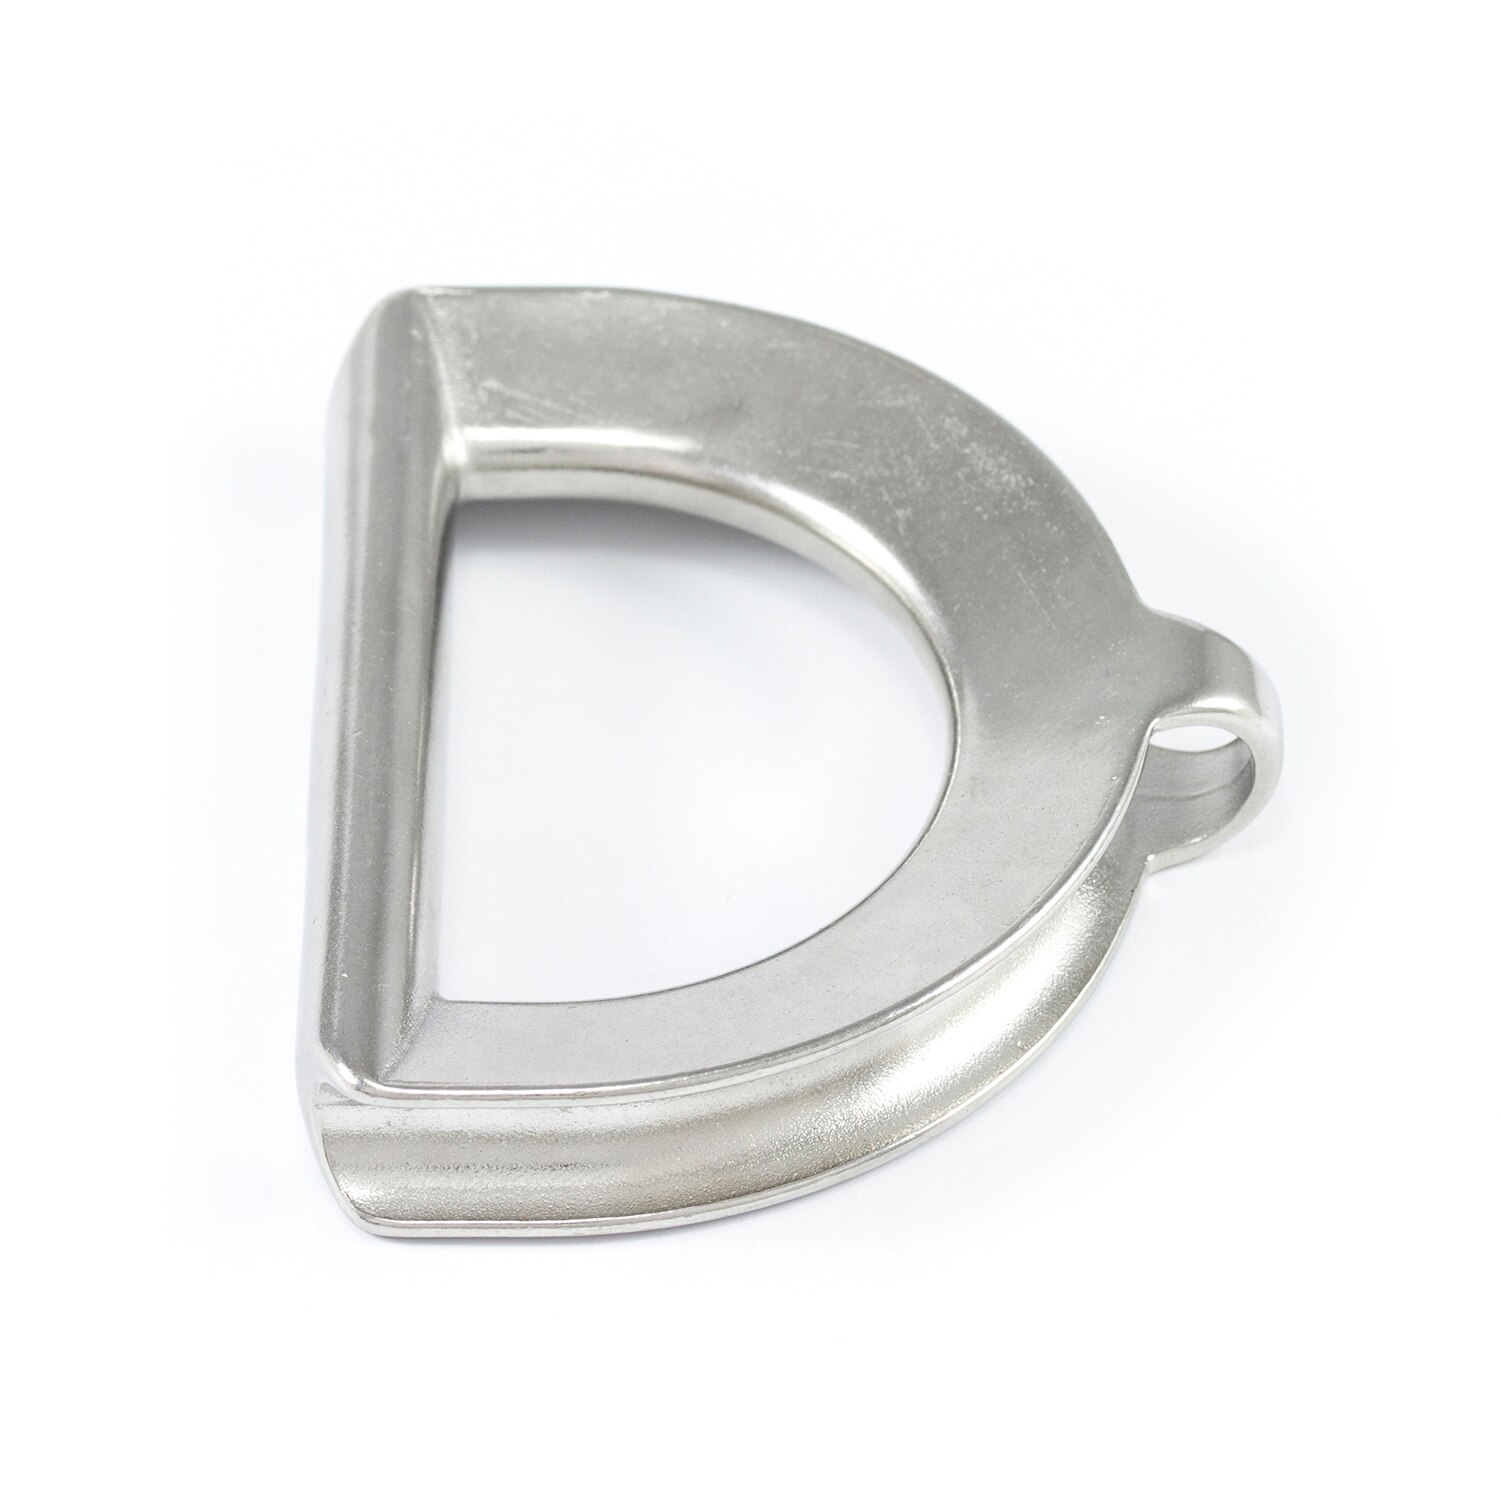 Stainless Steel WEB D RING FORGED SS 316 2 in.